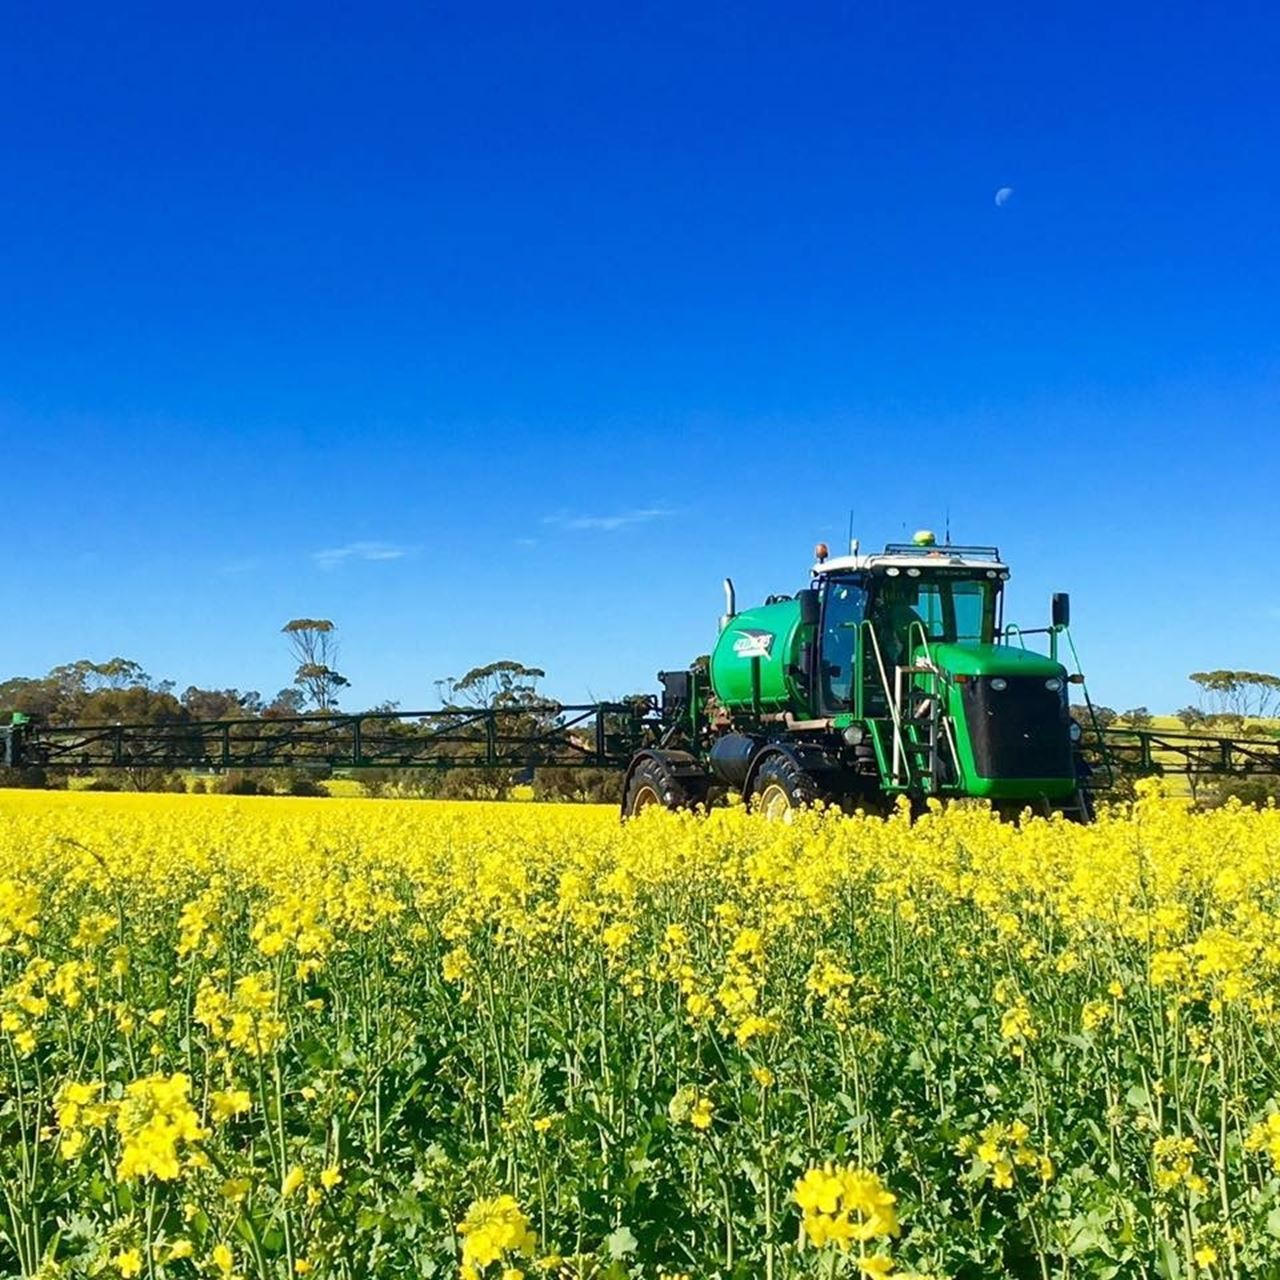 A green tractor sprays chemicals or fertiliser in a paddock of canola